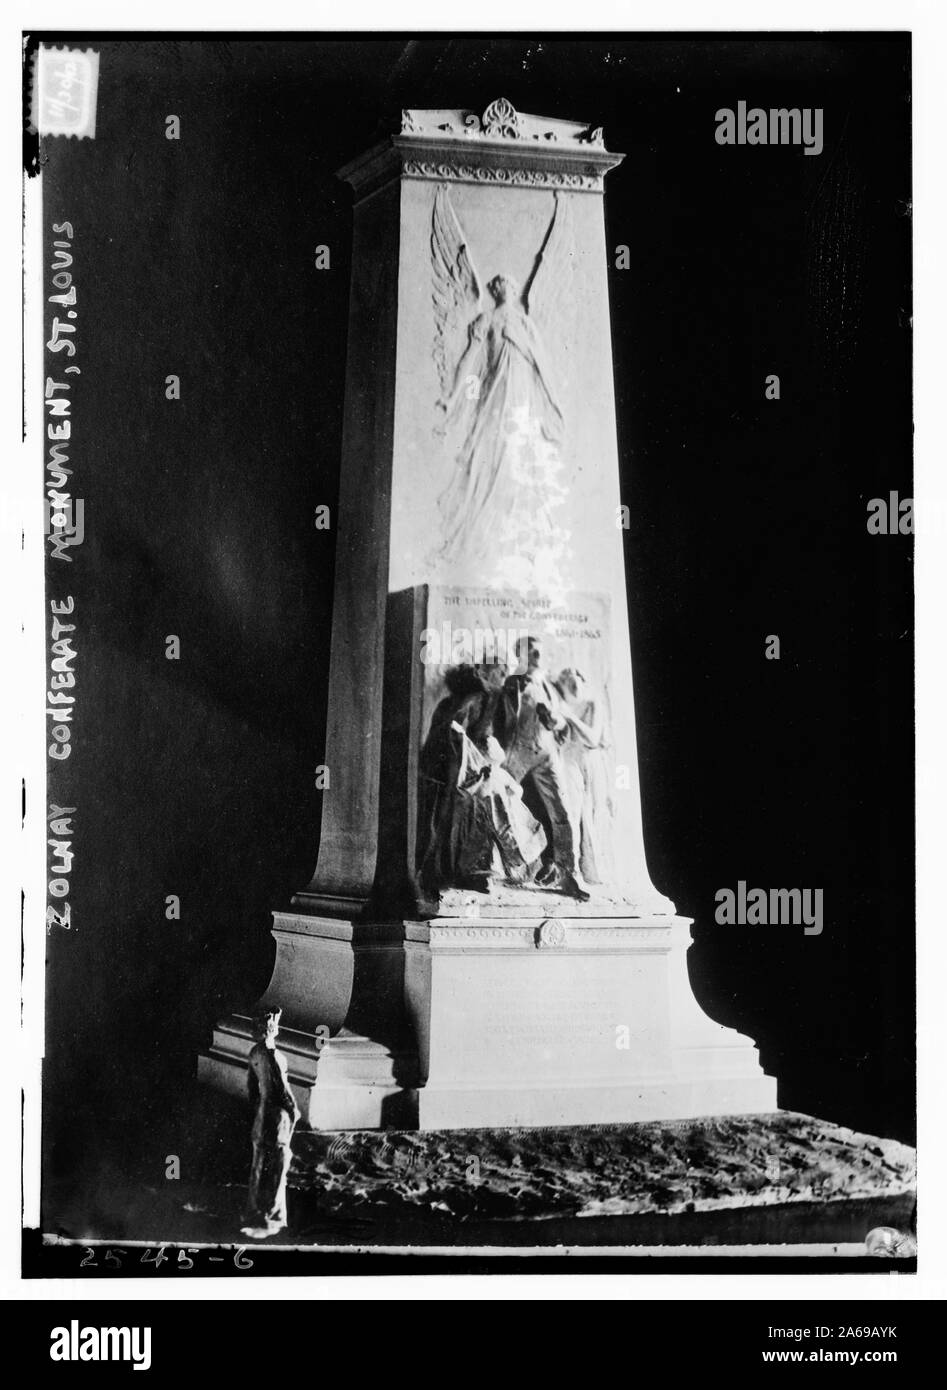 Zolnay Confederate Monument - St. Louis. The Ladies’ Confederate Monument Association commissioned famous sculptor George Julian Zolnay to create it at a cost of $23,000, raised over the course of 15 years, and expressly refrained from including a Confederate flag or any military weapons. It was moved from St. Louis in 2017 to be relocated. Stock Photo